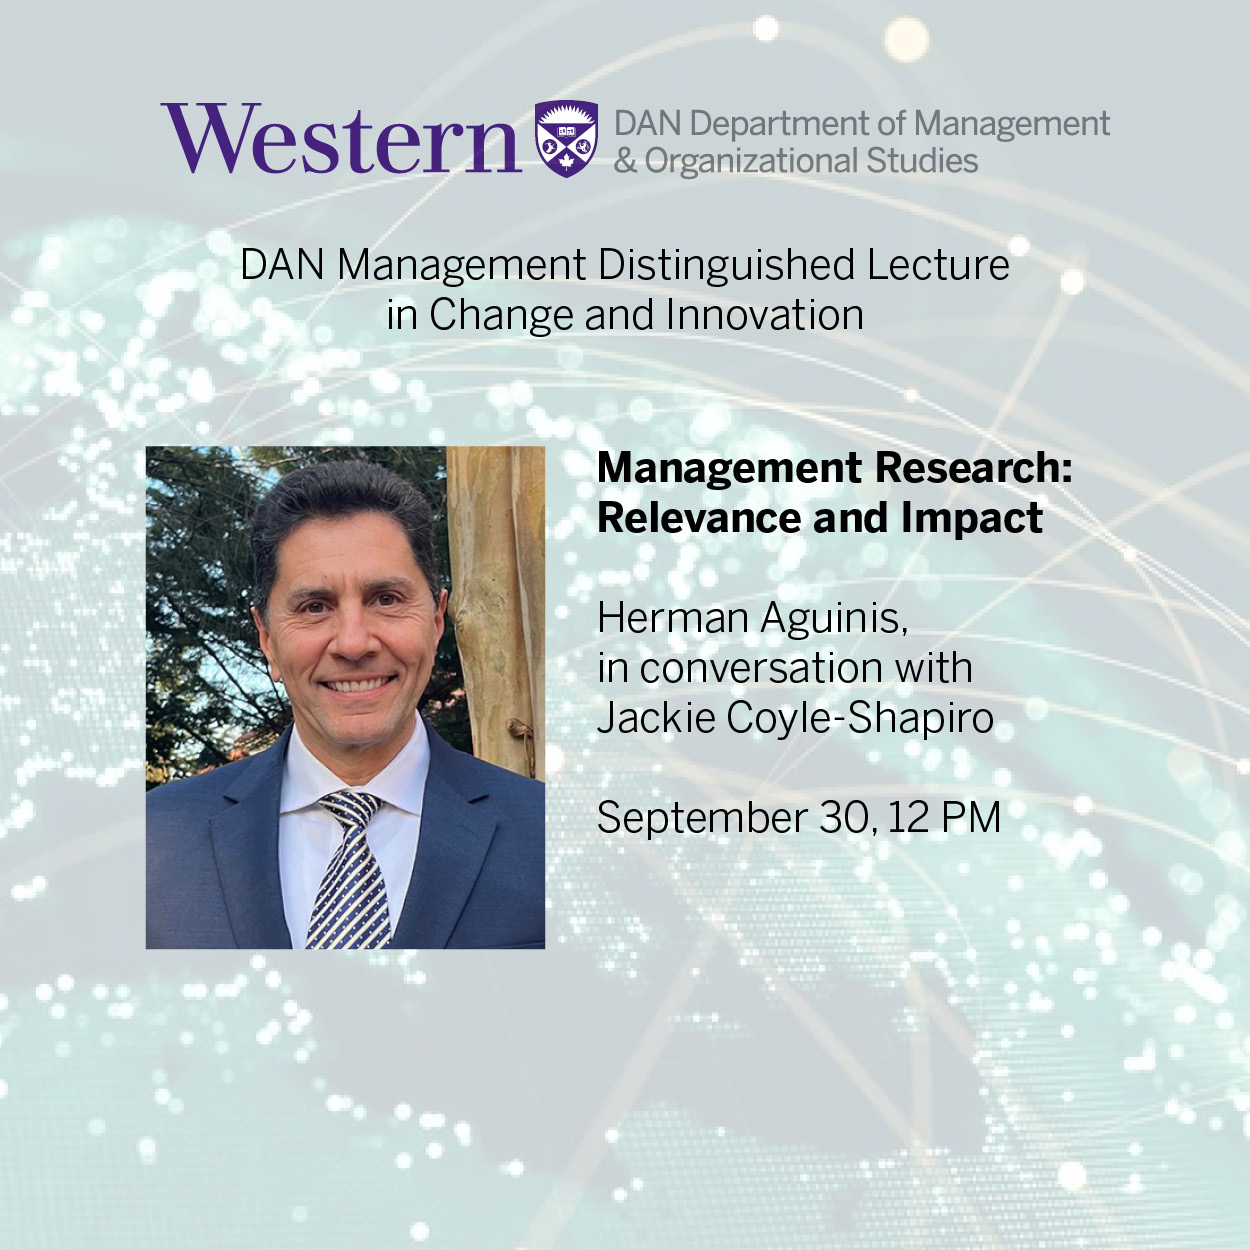 DAN Management Distinguished Lecture in Change and Innovation